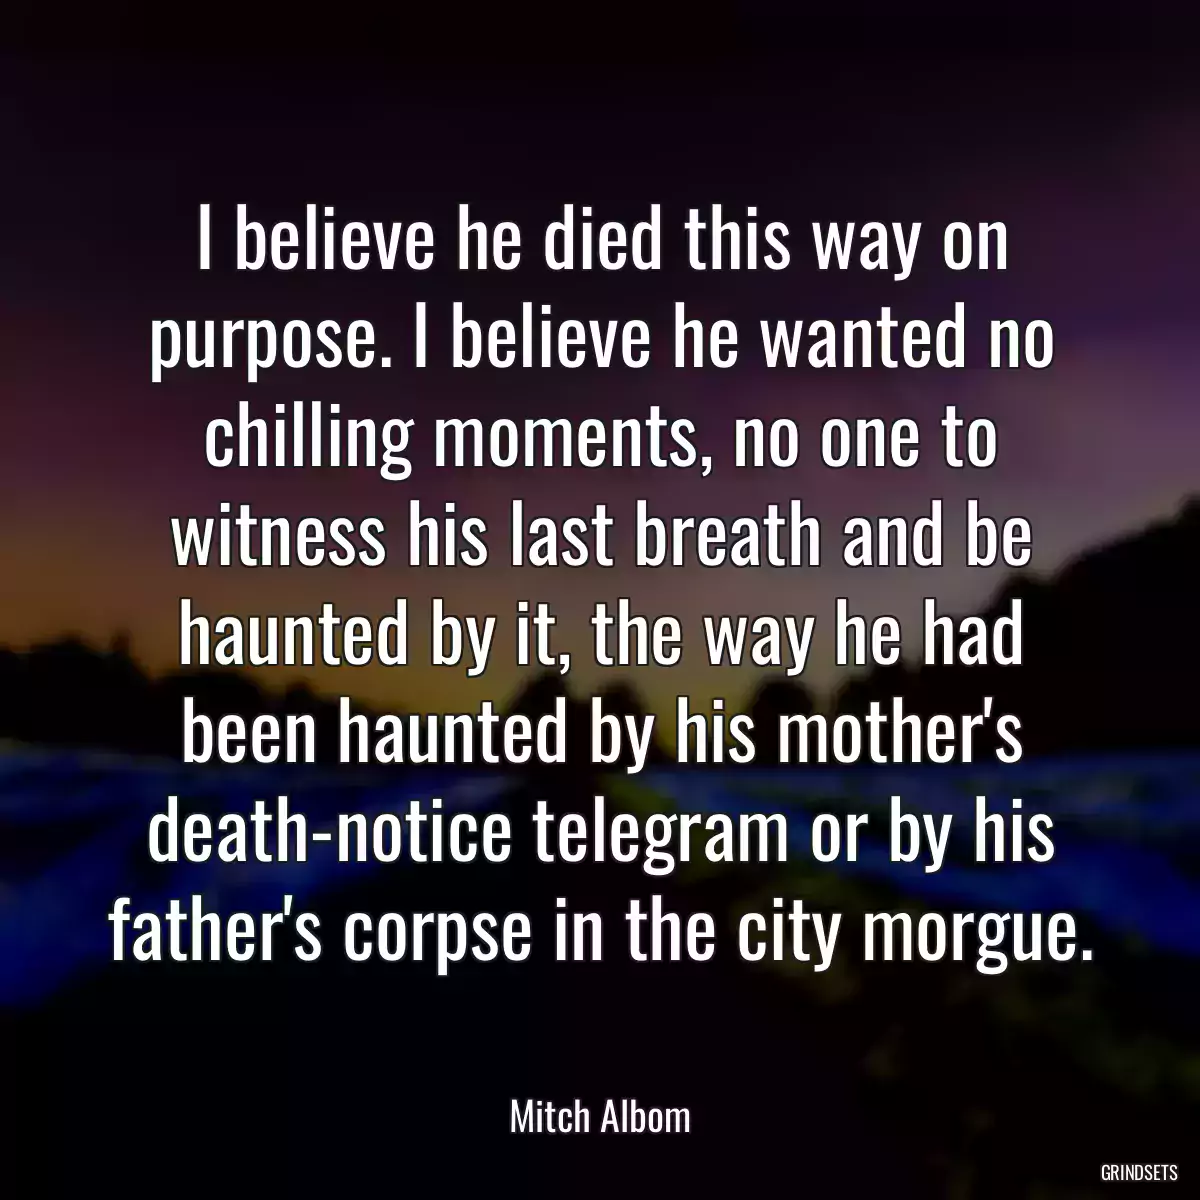 I believe he died this way on purpose. I believe he wanted no chilling moments, no one to witness his last breath and be haunted by it, the way he had been haunted by his mother\'s death-notice telegram or by his father\'s corpse in the city morgue.